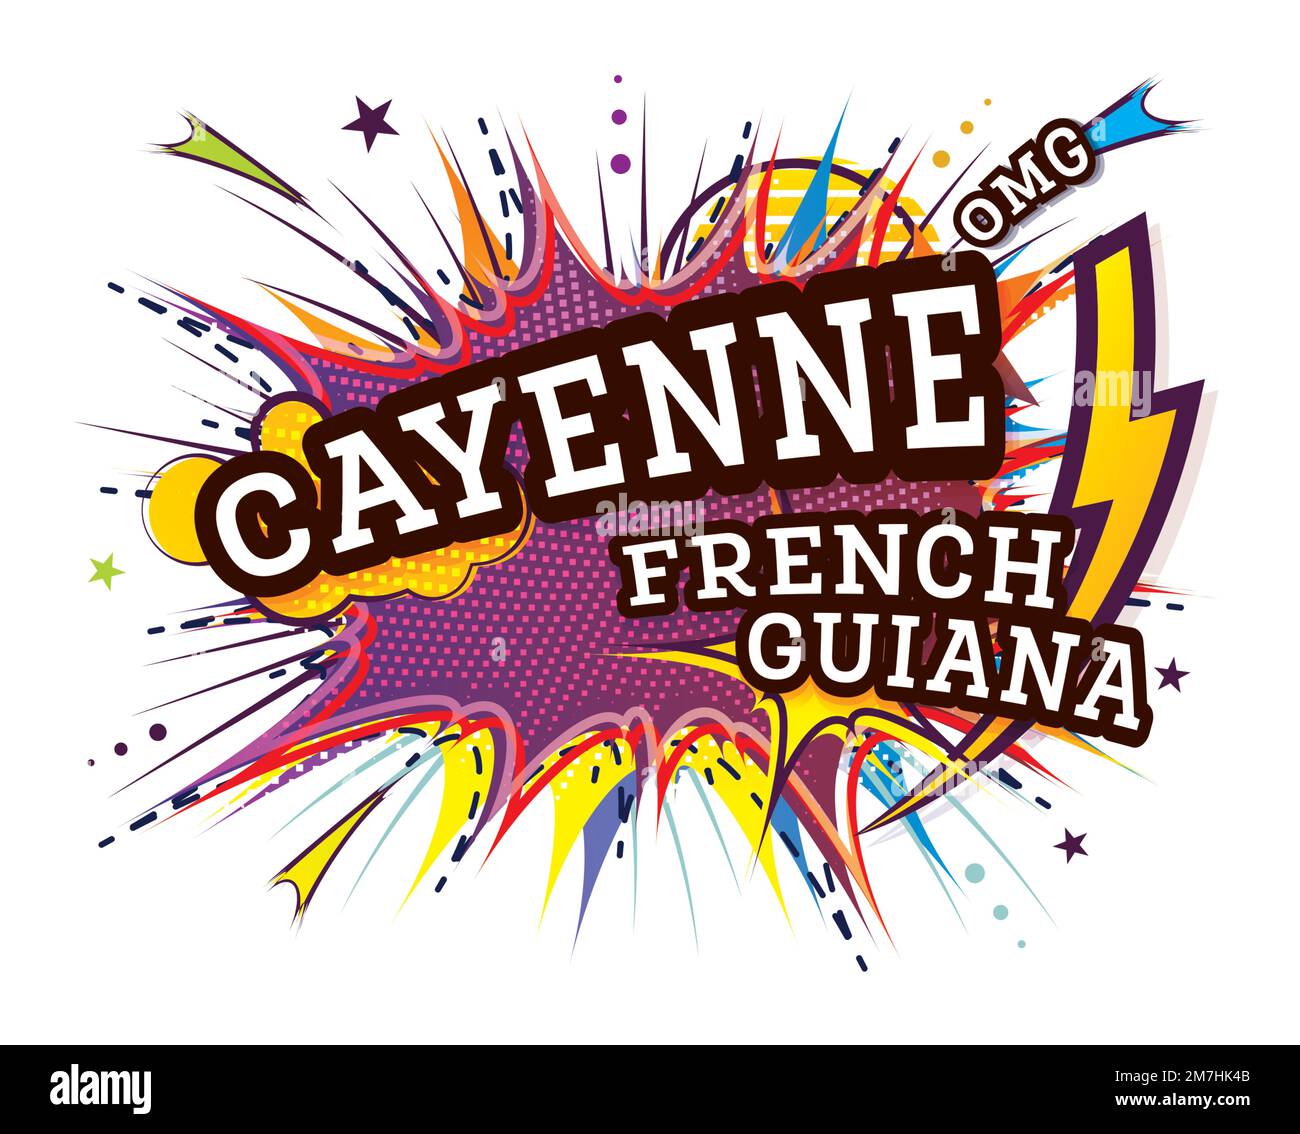 Cayenne French Guiana Comic Text in Pop Art Style Isolated on White Background. Vector Illustration. Retro Artwork with Geometric Design Elements. Stock Vector